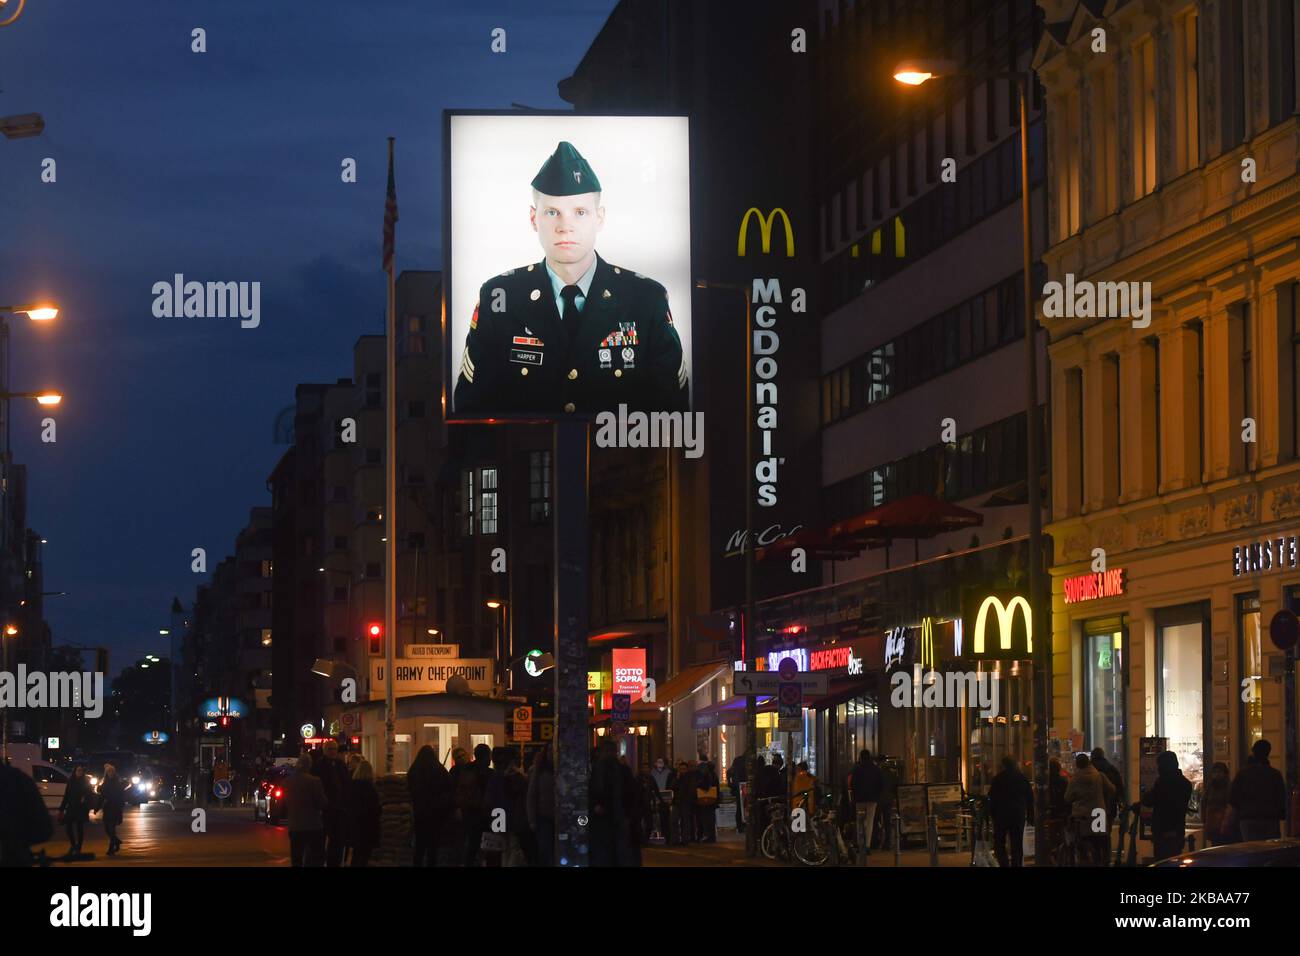 A portrait of a U.S. soldier stands illuminated at former Checkpoint Charlie, where U.S. and Soviet tanks confronted each other in the early years of the Cold War, seen just two days ahead of the upcoming 30th anniversary of the fall of the Berlin Wall. The Berlin Wall divided the German capital from 1961 until 1989. Checkpoint Charlie was a main crossing point at the Wall from the American Sector in West Berlin into the Russian sector in East Berlin. On Thursday, November 7, 2019, in Berlin, Germany. (Photo by Artur Widak/NurPhoto) Stock Photo